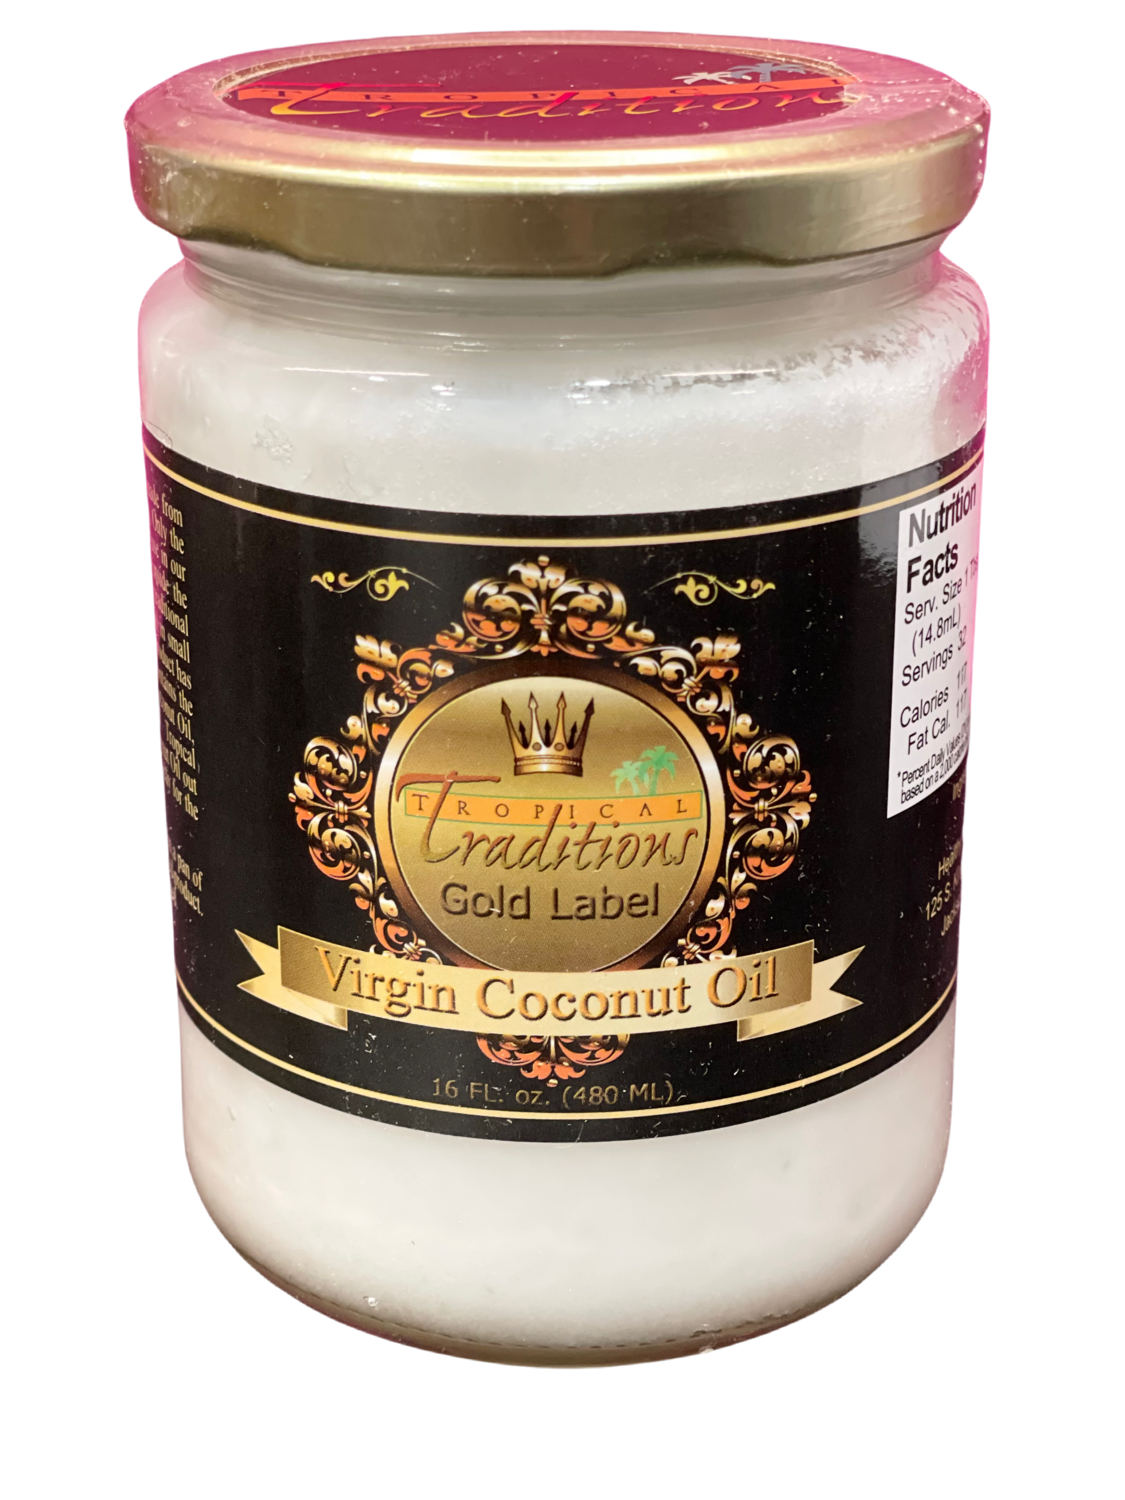 NEW! Tropical Traditions Virgin Coconut Oil - Gold Label - 16 oz. - 1 Pint(16 oz glass jar)